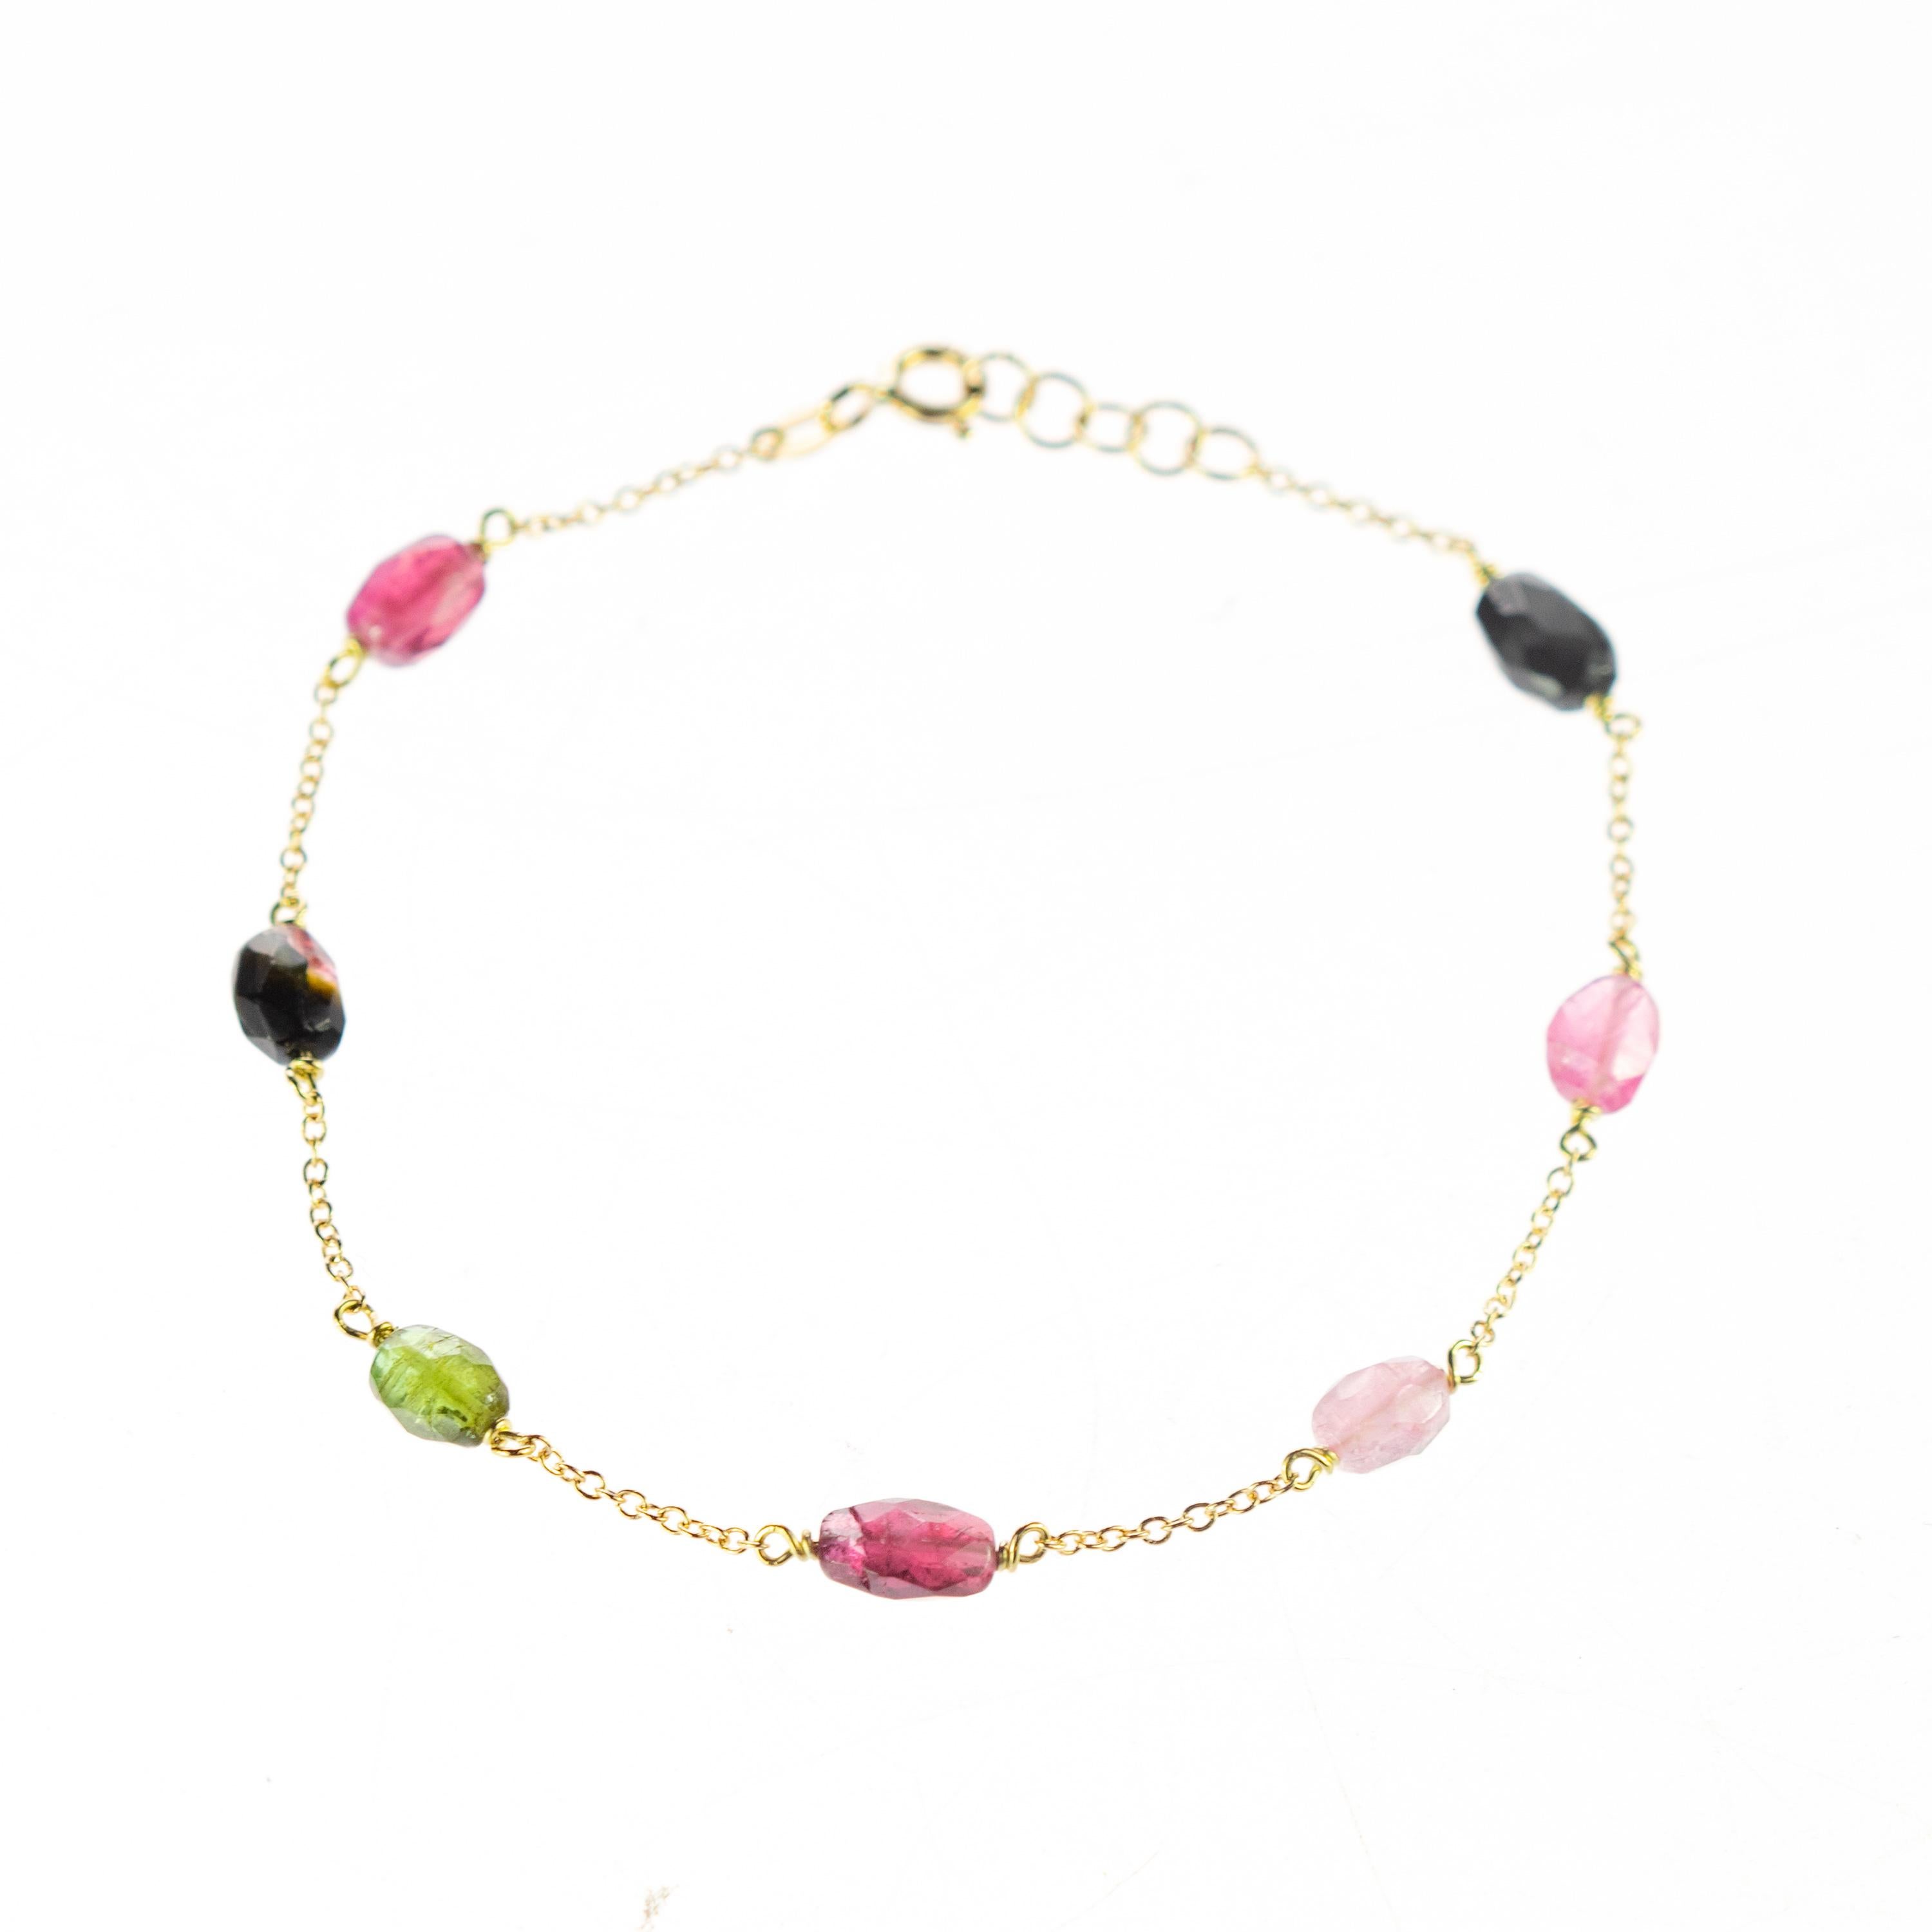 Intini Jewels signature quality on a modern and contemporary design jewel. Seven oval gems of top quality of tourmaline embellish a delicate Gold Plate chain bracelet. A jewel full of color and pasion. Anklet and bracelet

Ancient beliefs say that